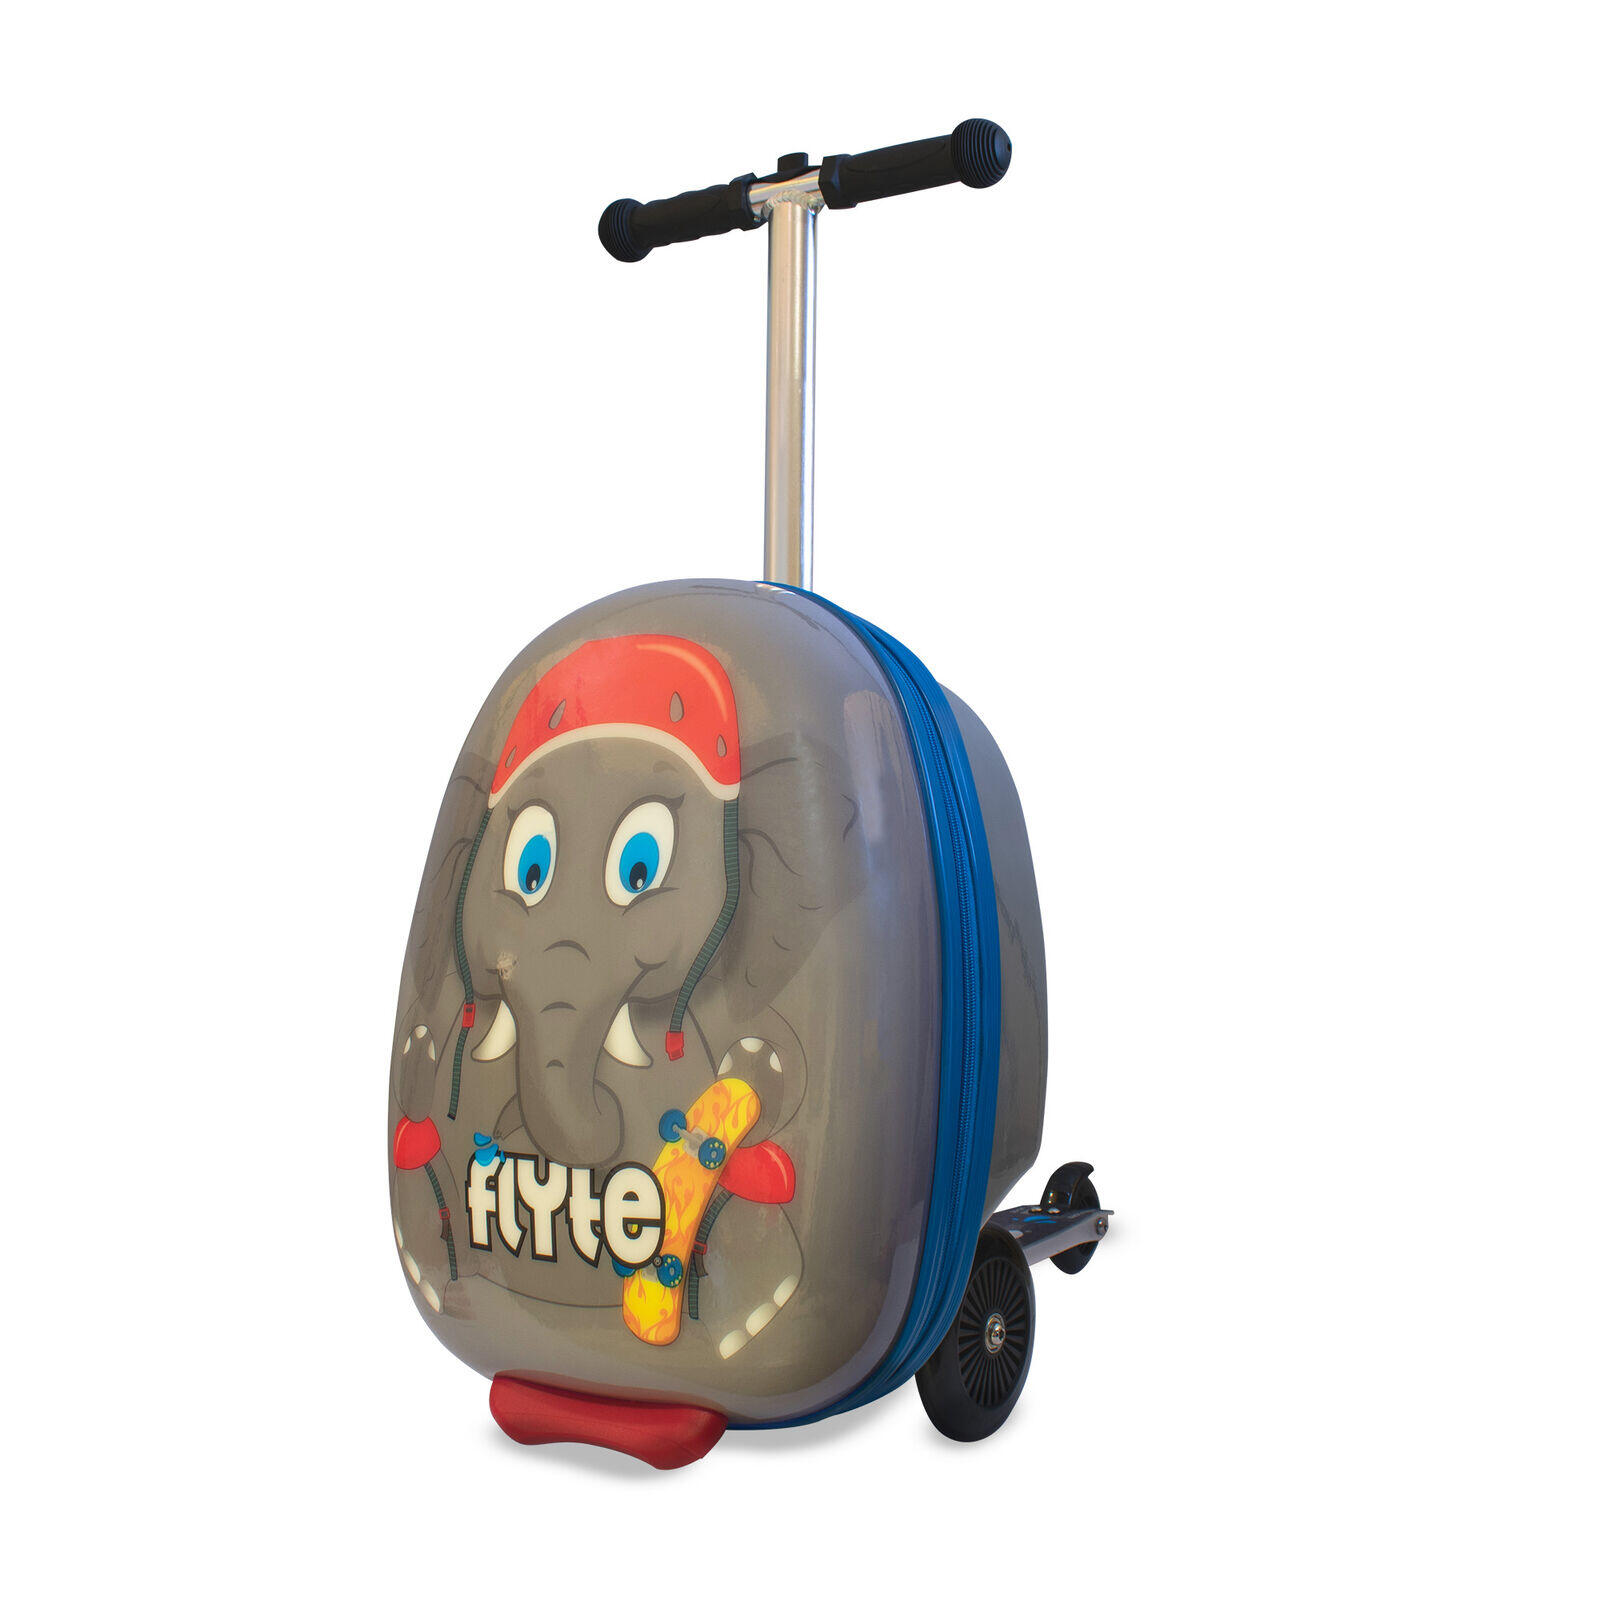 FLYTE Flyte Midi 18 Inch Eddie the Elephant Scooter Suitcase